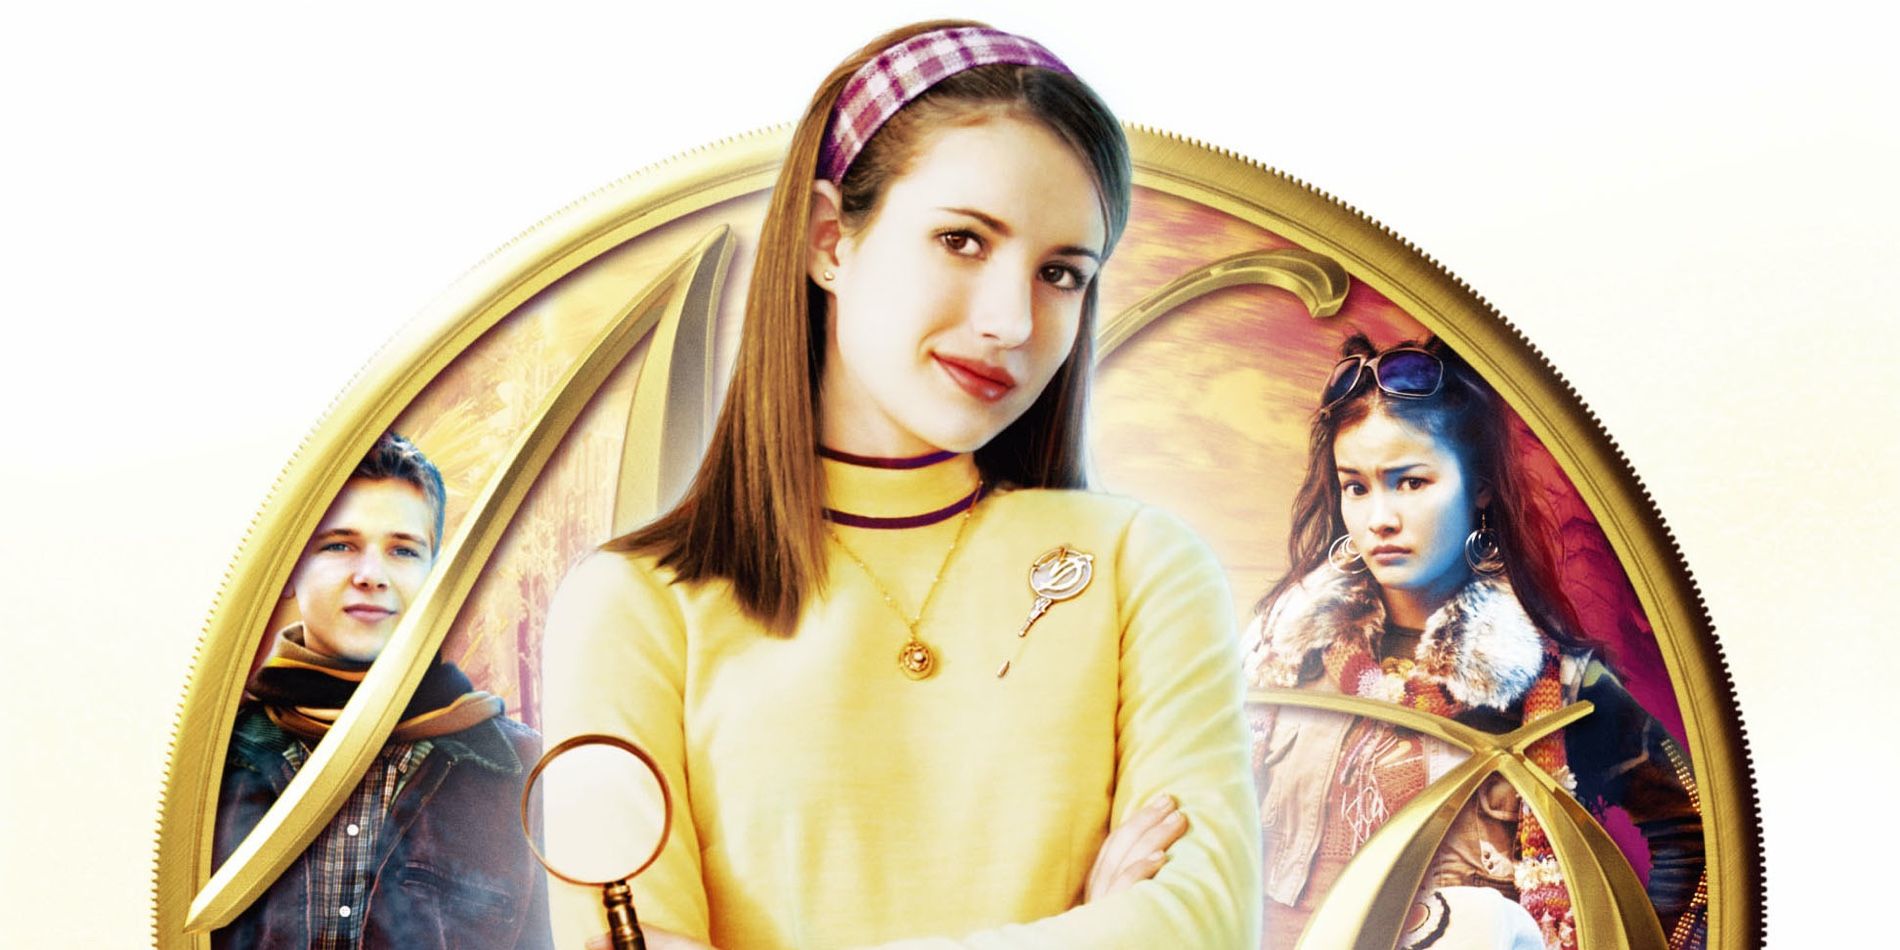 A cover image of Nancy Drew played by Emma Roberts with her friends in the background